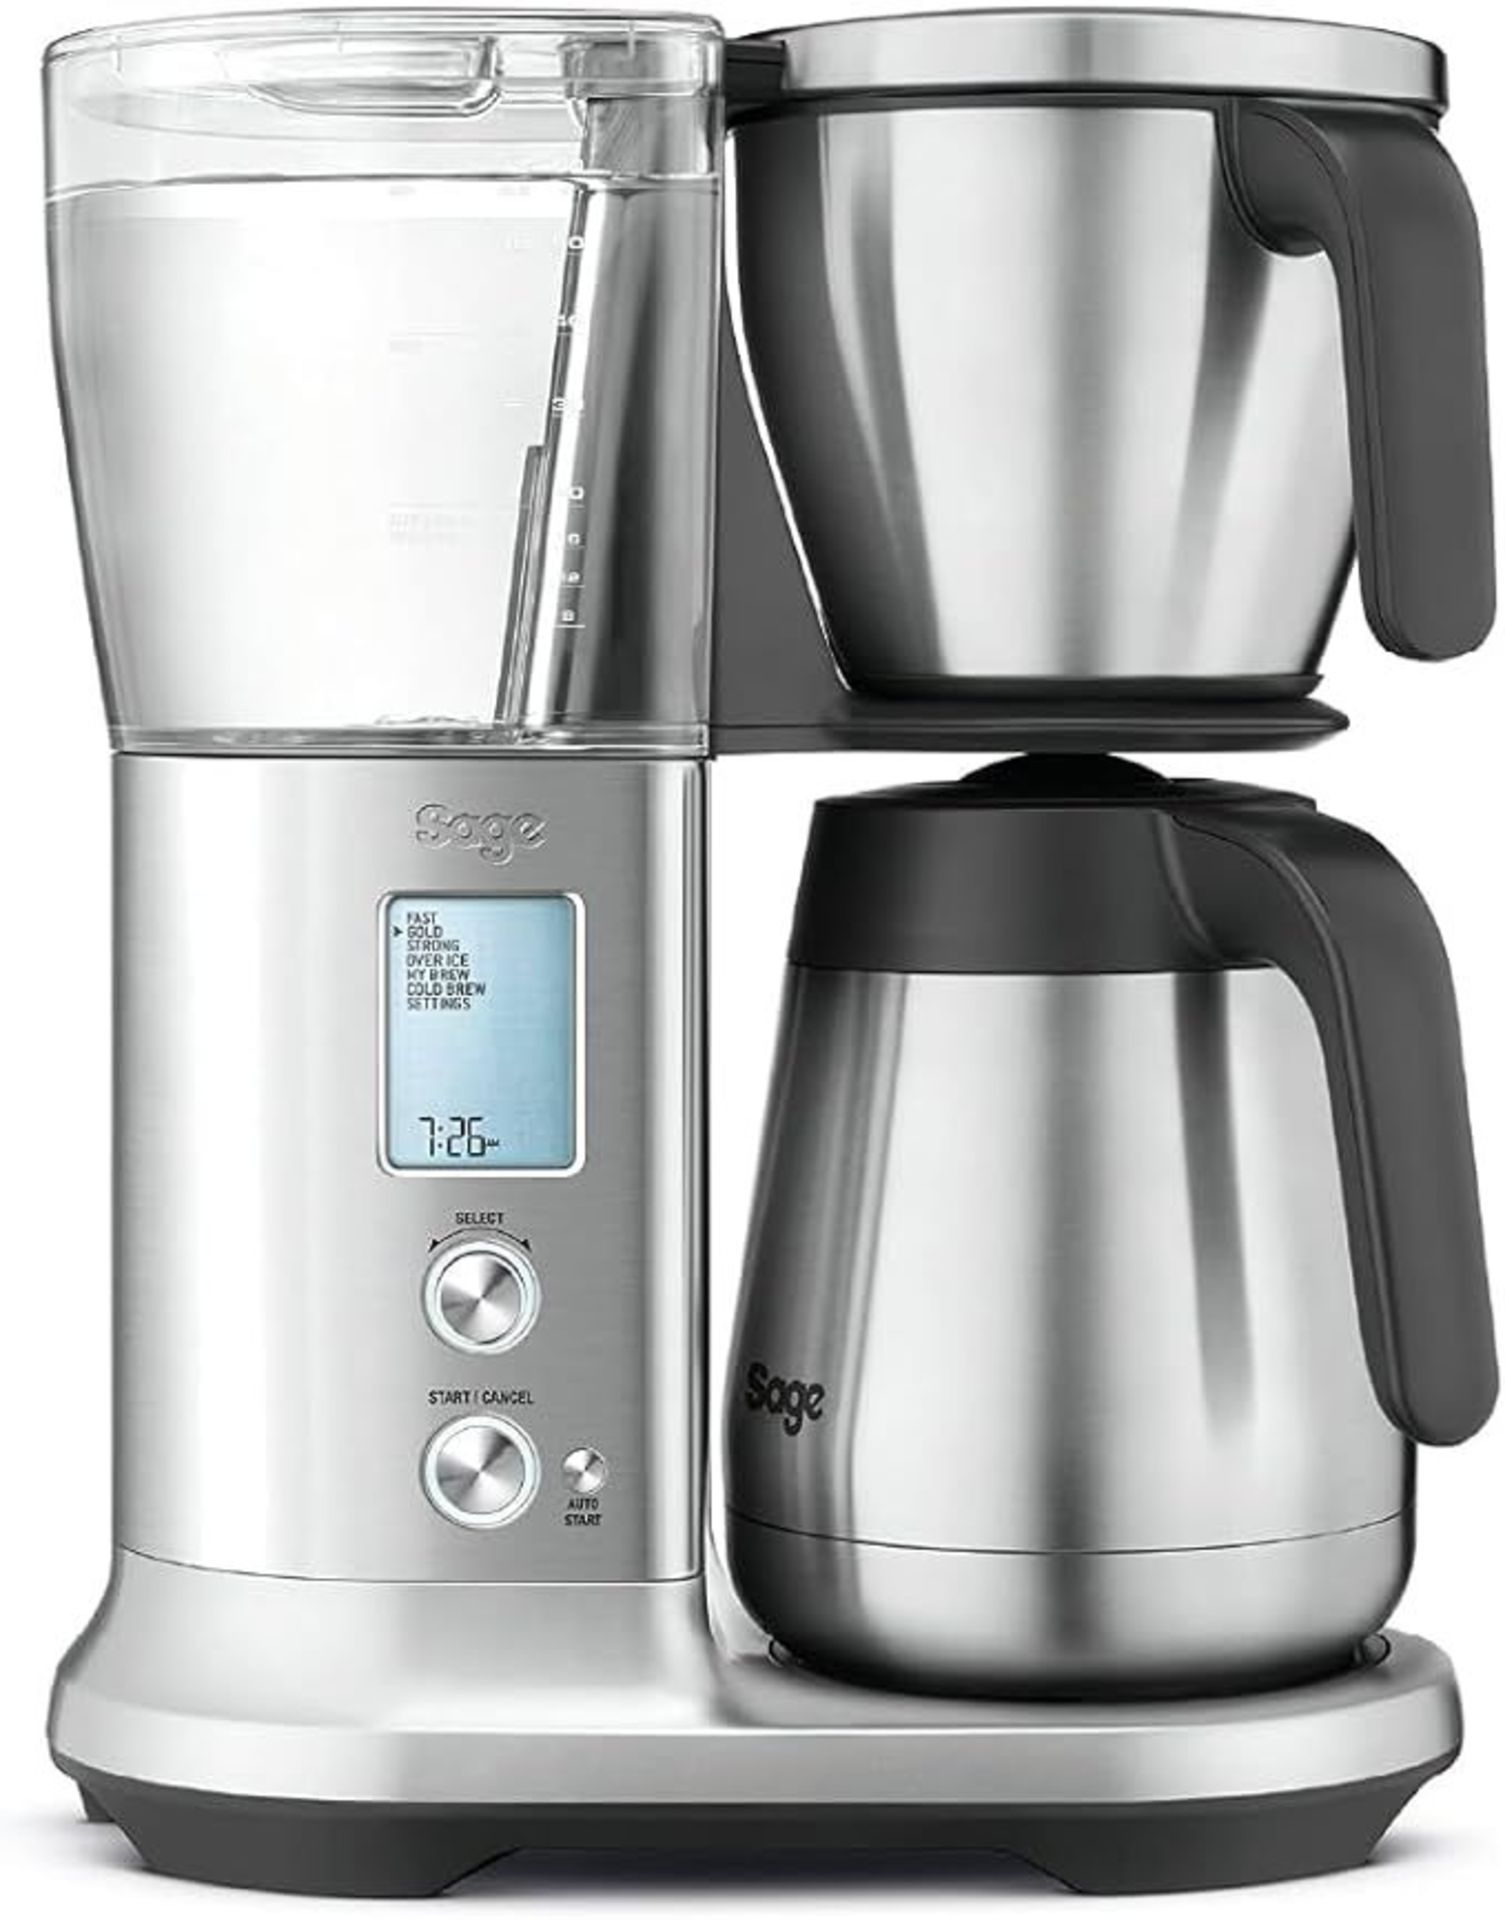 Sage - Precision Brewer Thermal. - EBR3. RRP £299.95. The Sage Precision Brewer Thermal is a 1.7L